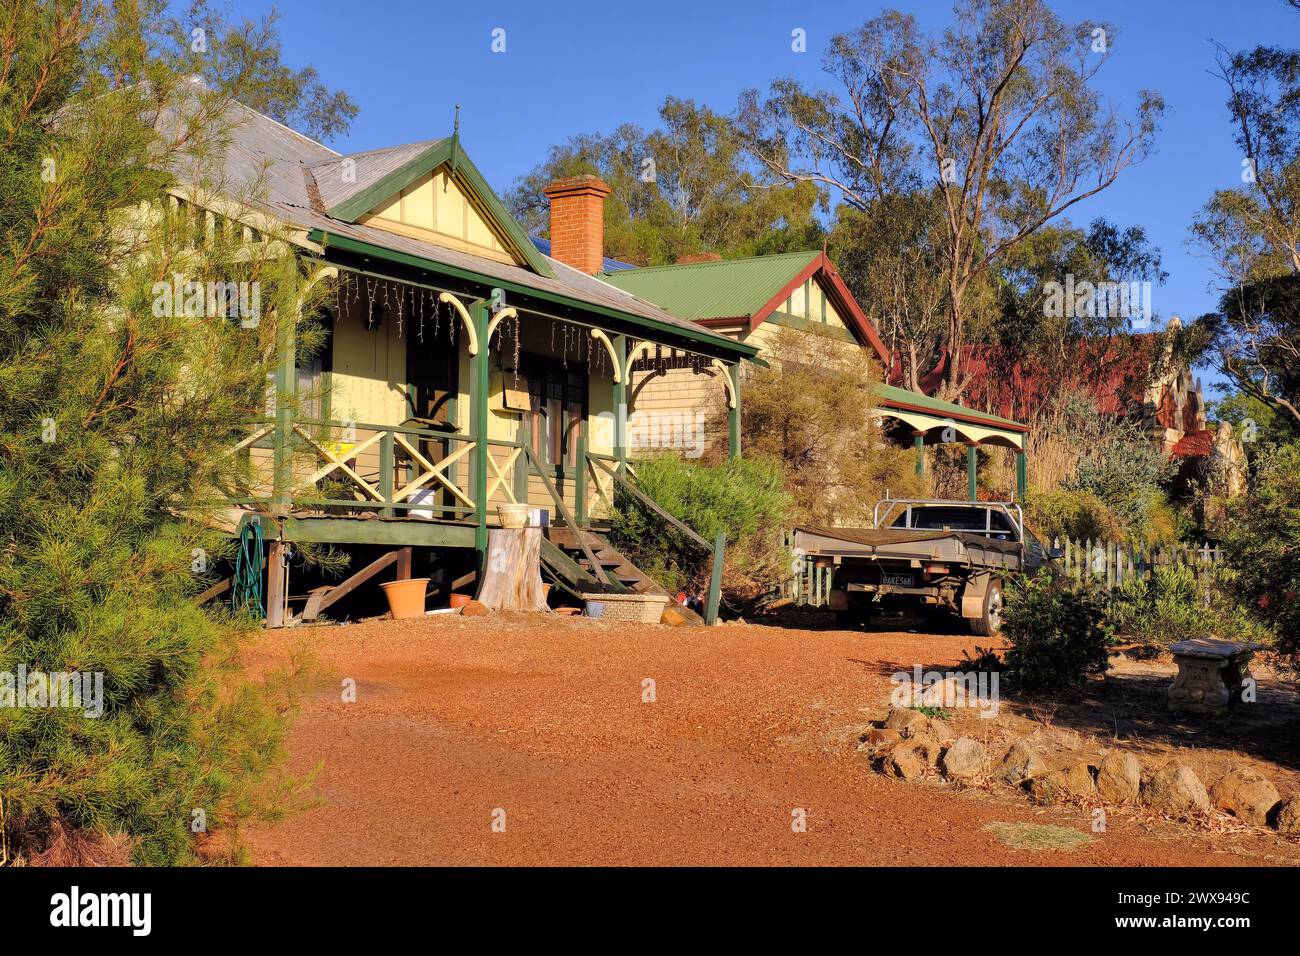 Toodyay: Traditional weatherboard houses with tin roof and verandah and utility (ute) vehicle soon after sunrise in Toodyay, Wheatbelt, WA Stock Photo